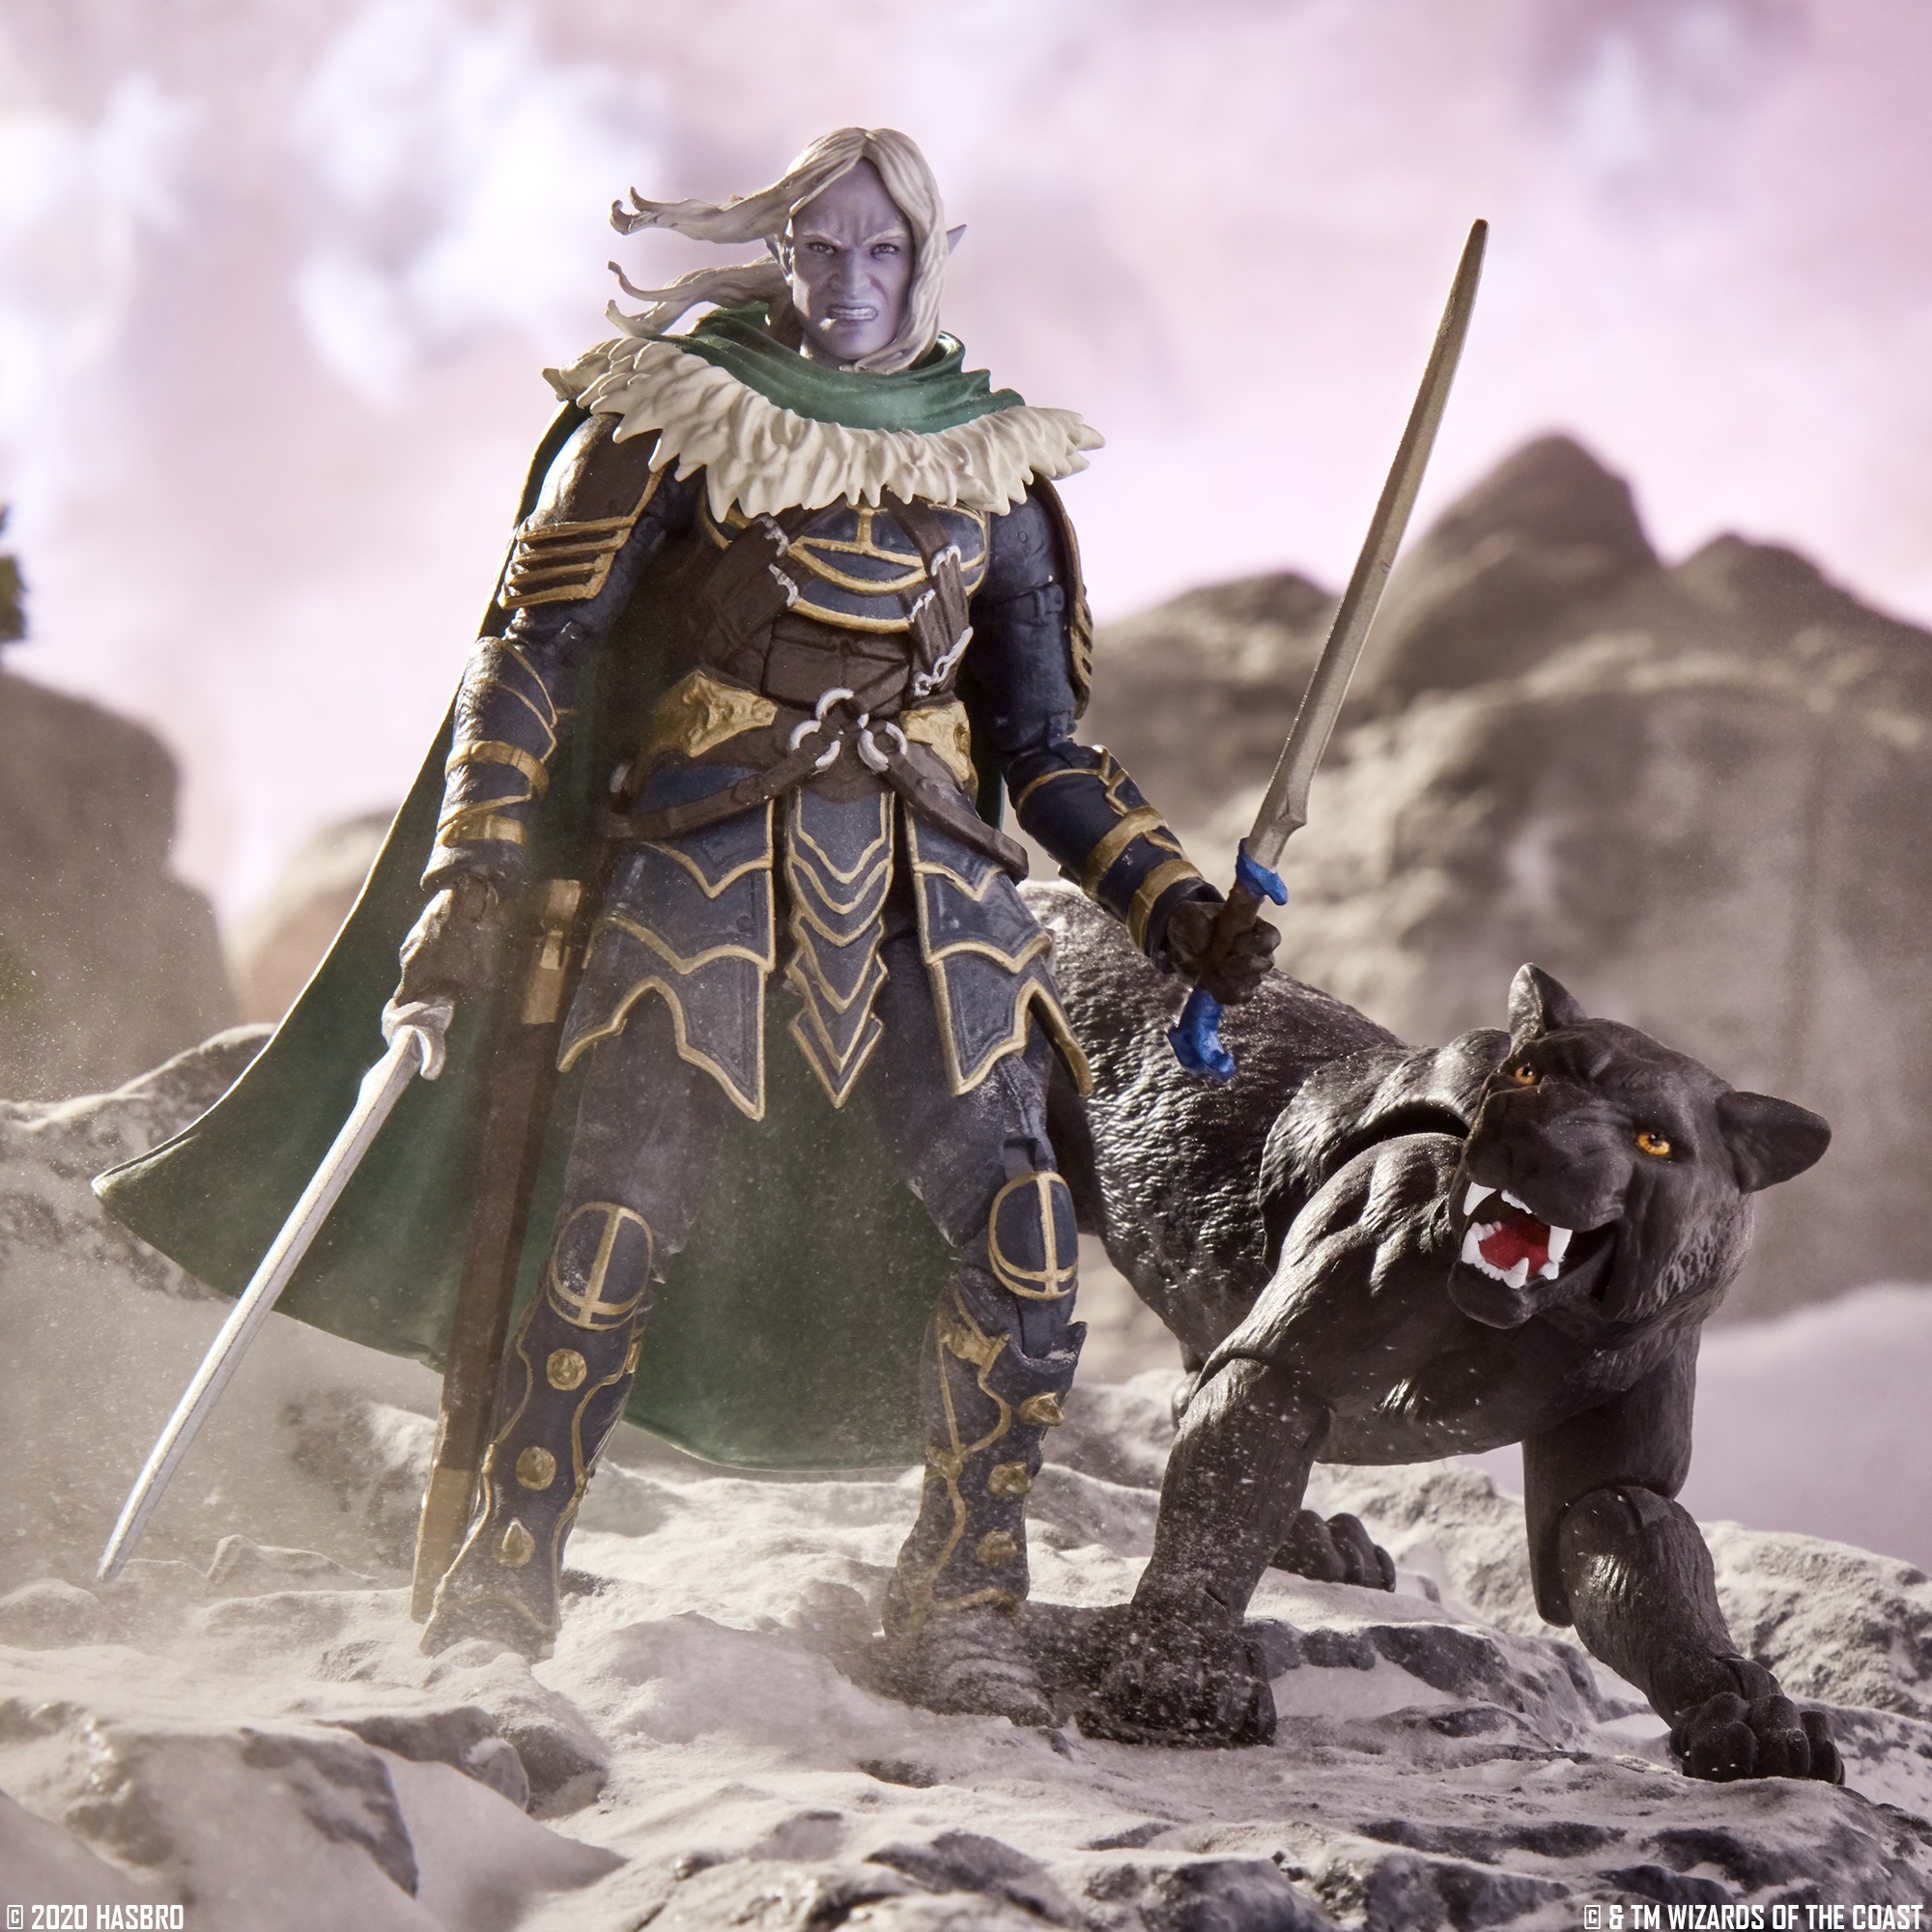 Drizzt and Guenhwyvar